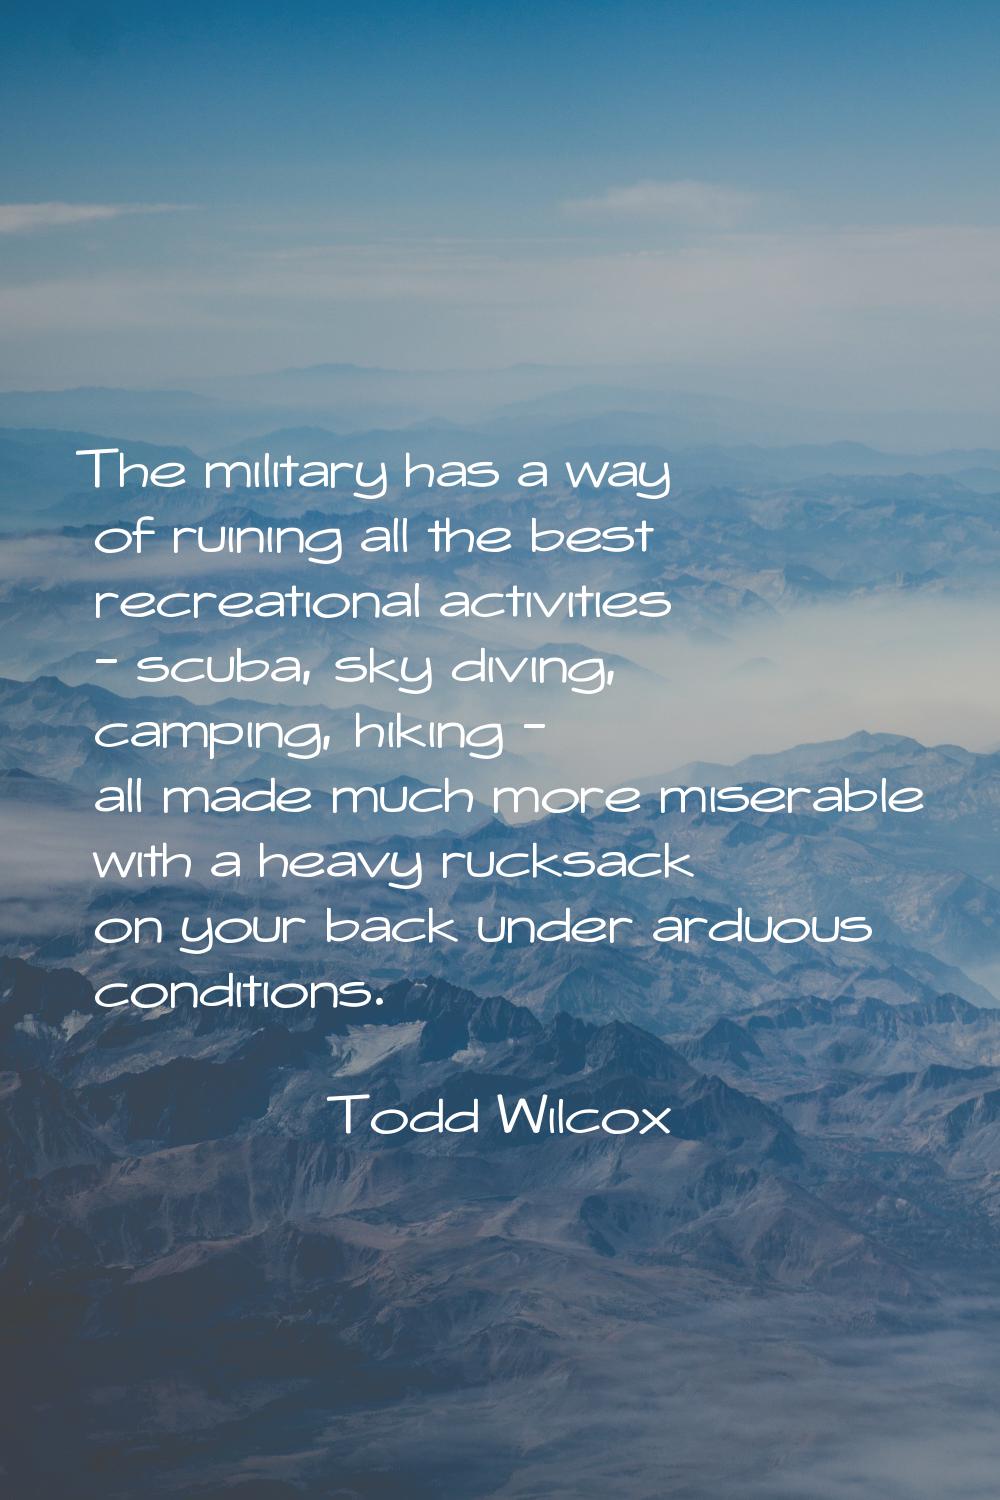 The military has a way of ruining all the best recreational activities - scuba, sky diving, camping